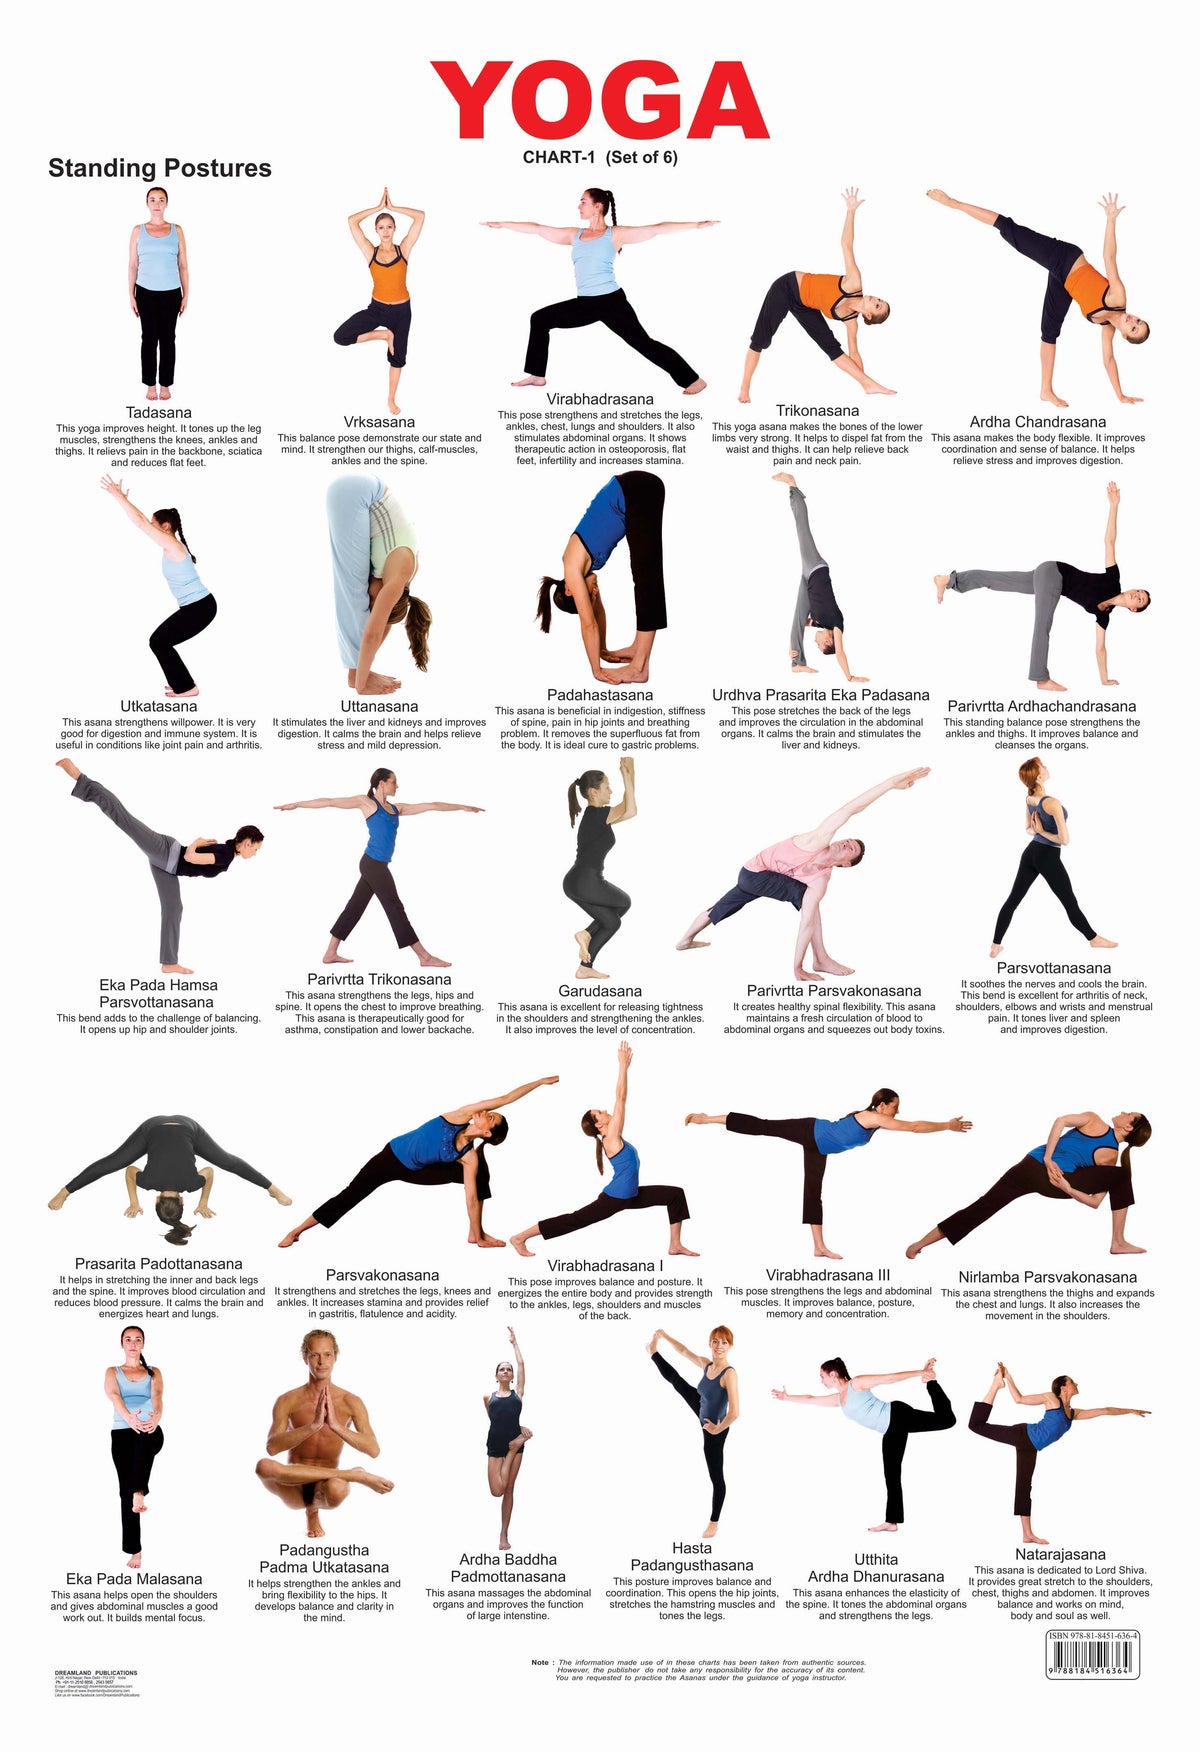 Brainobrain UAE - Here are some easy yoga poses that you can do easily.  Lets make yoga a habit, slowly and steadily, for our overall wellness.  www.brainobrain.com #Brainobrain #goodthoughts #yoga #yogapractice  #yogaforbeginners #